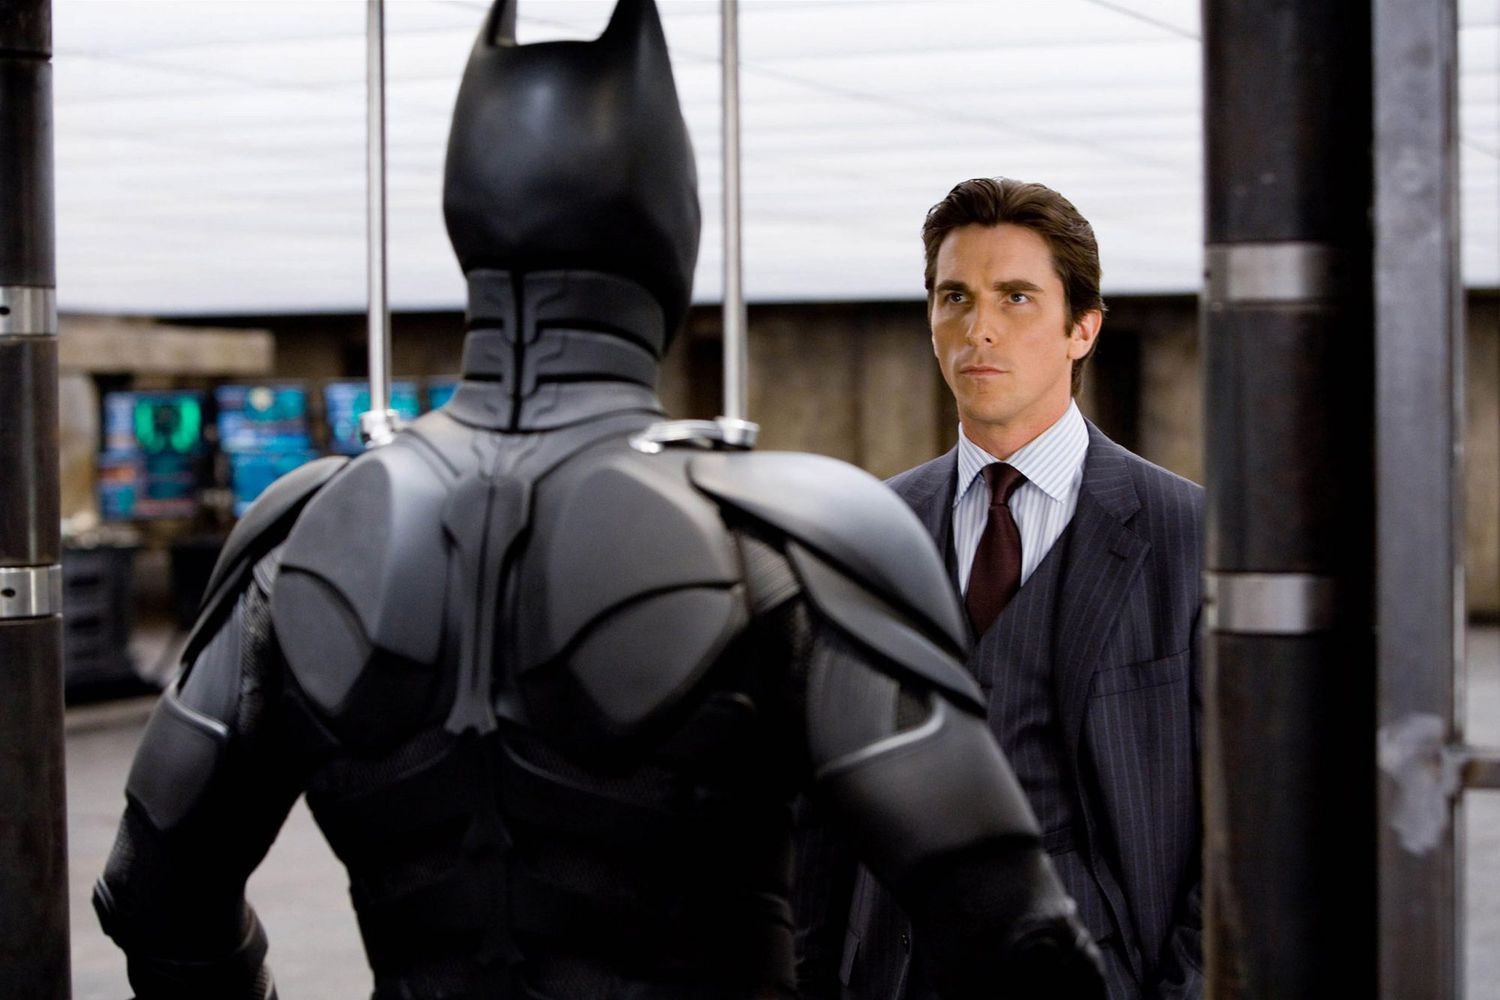 Christian Bale as Bruce Wayne in a still from The Dark Knight Trilogy